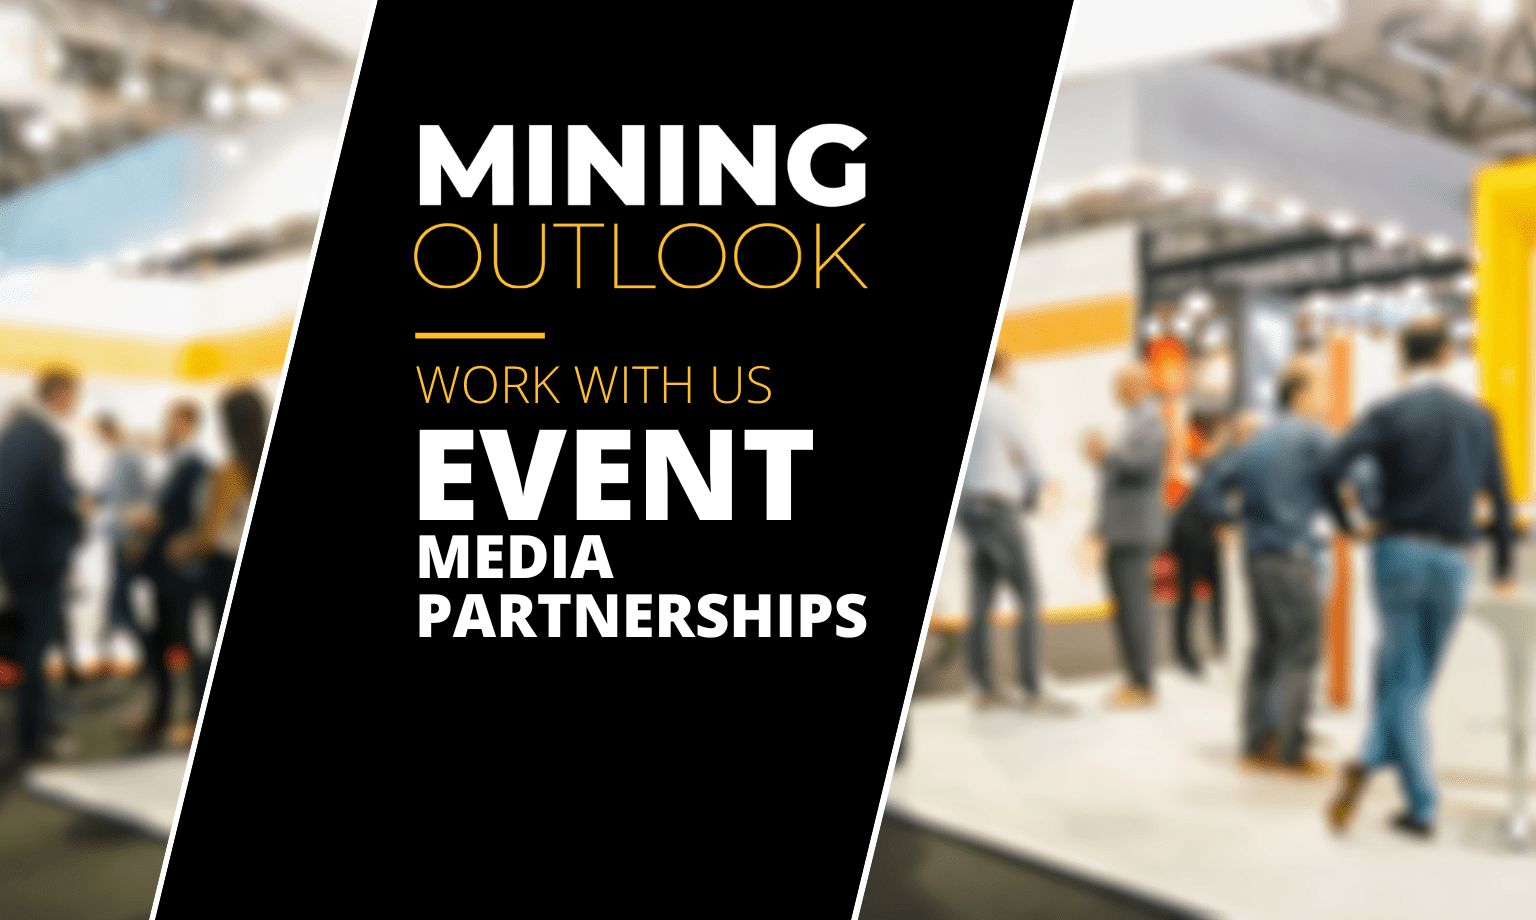 Featured Event Partnerships Mining Outlook